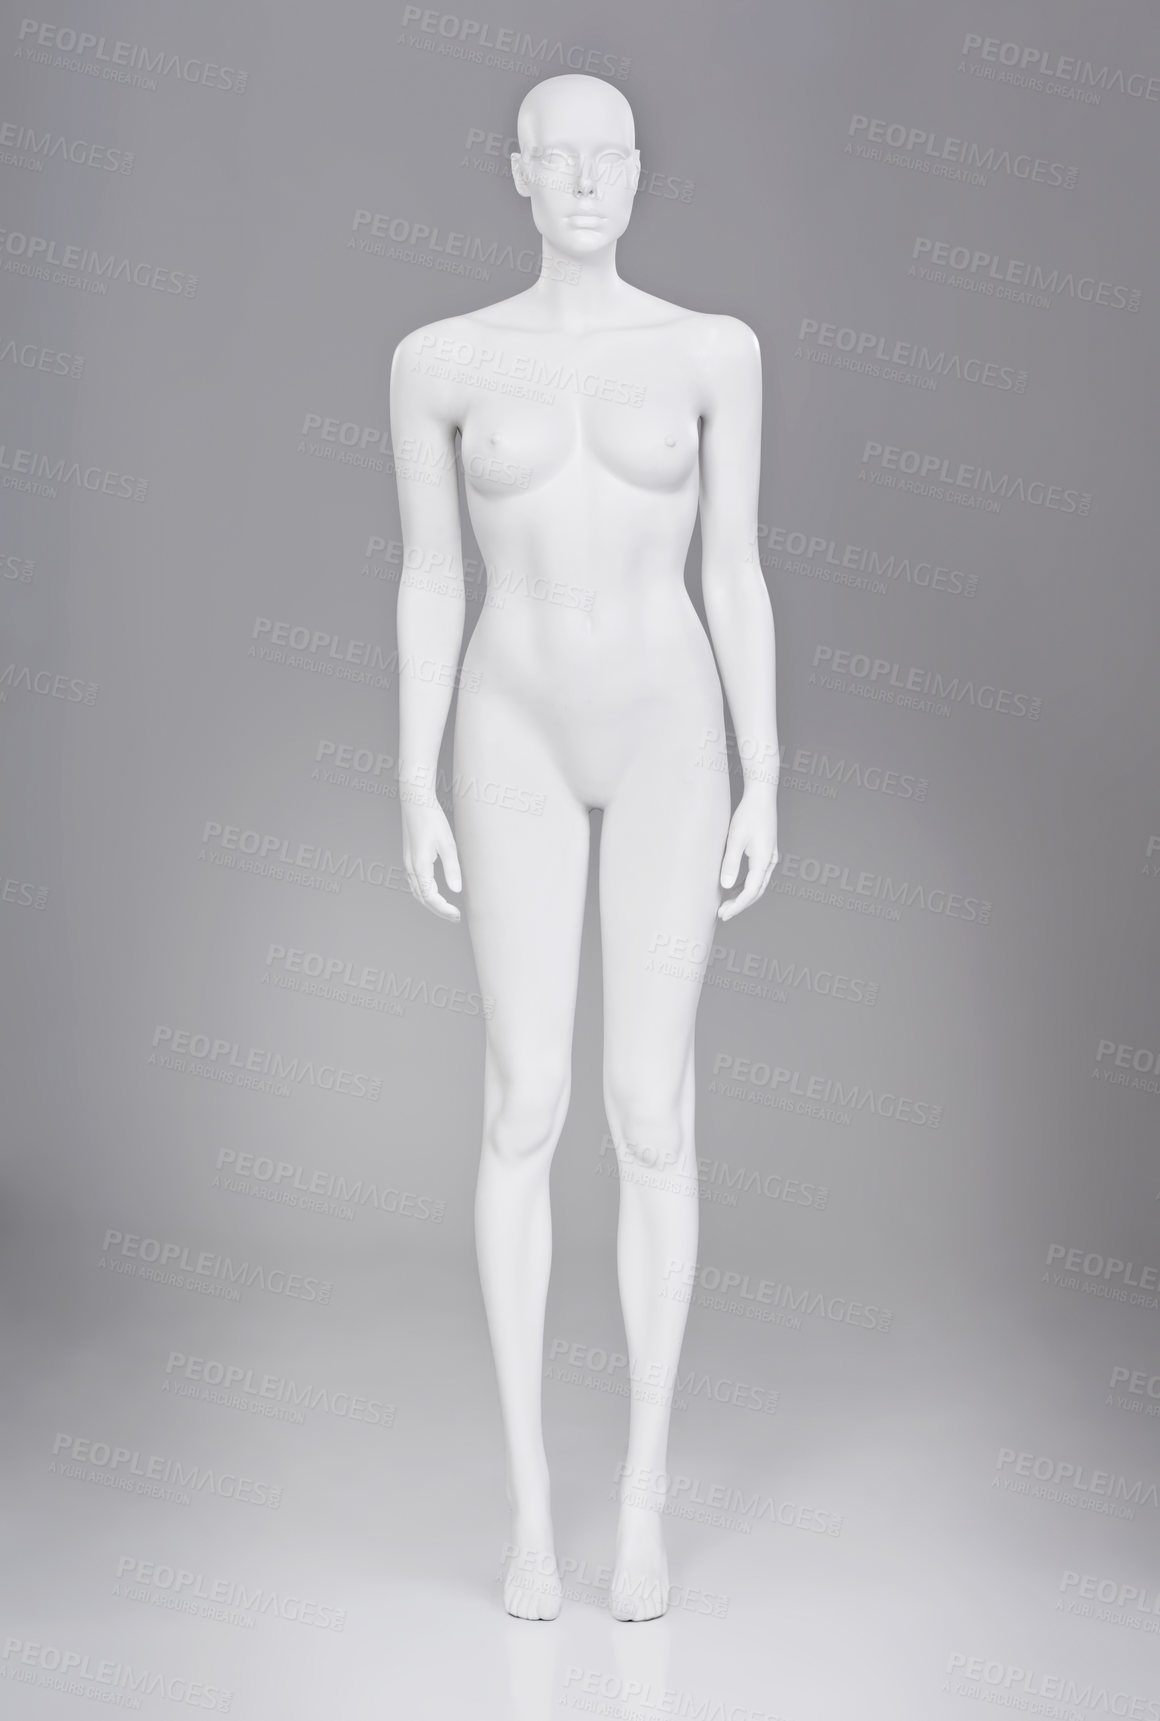 Buy stock photo Shot of a clothing mannequin